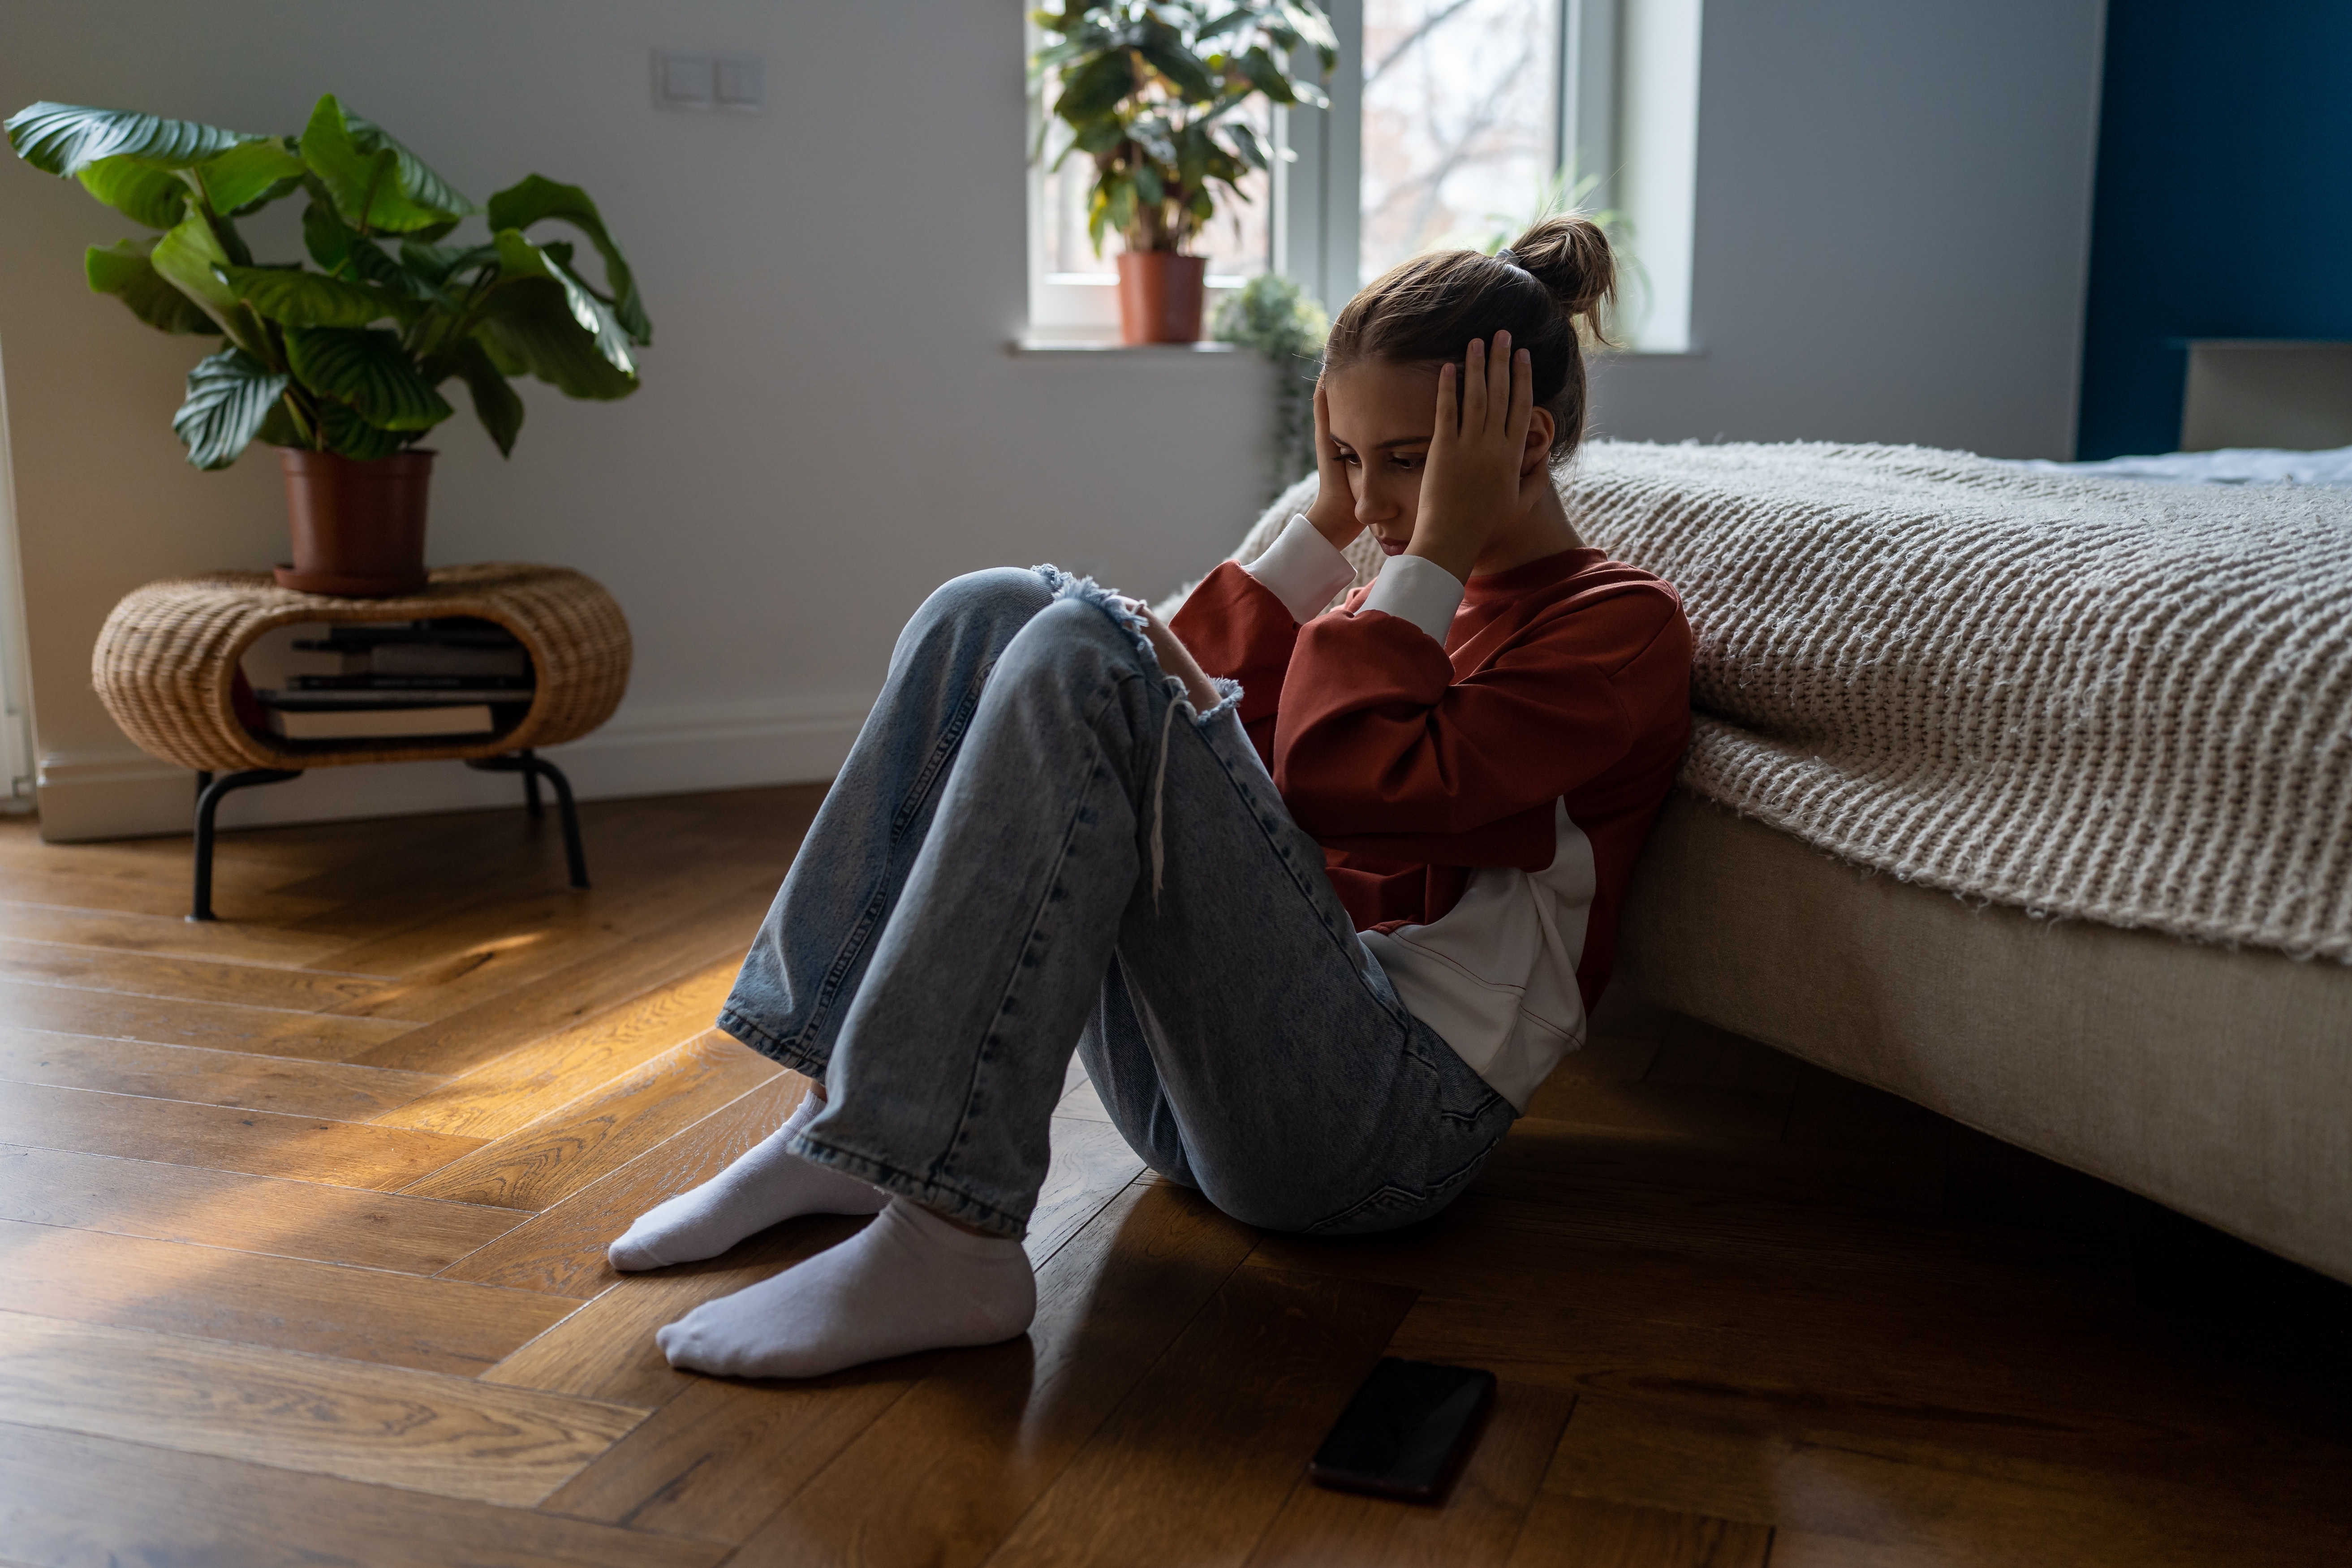 Frustrated sad teen girl child sitting alone on floor. | Source: Shutterstock